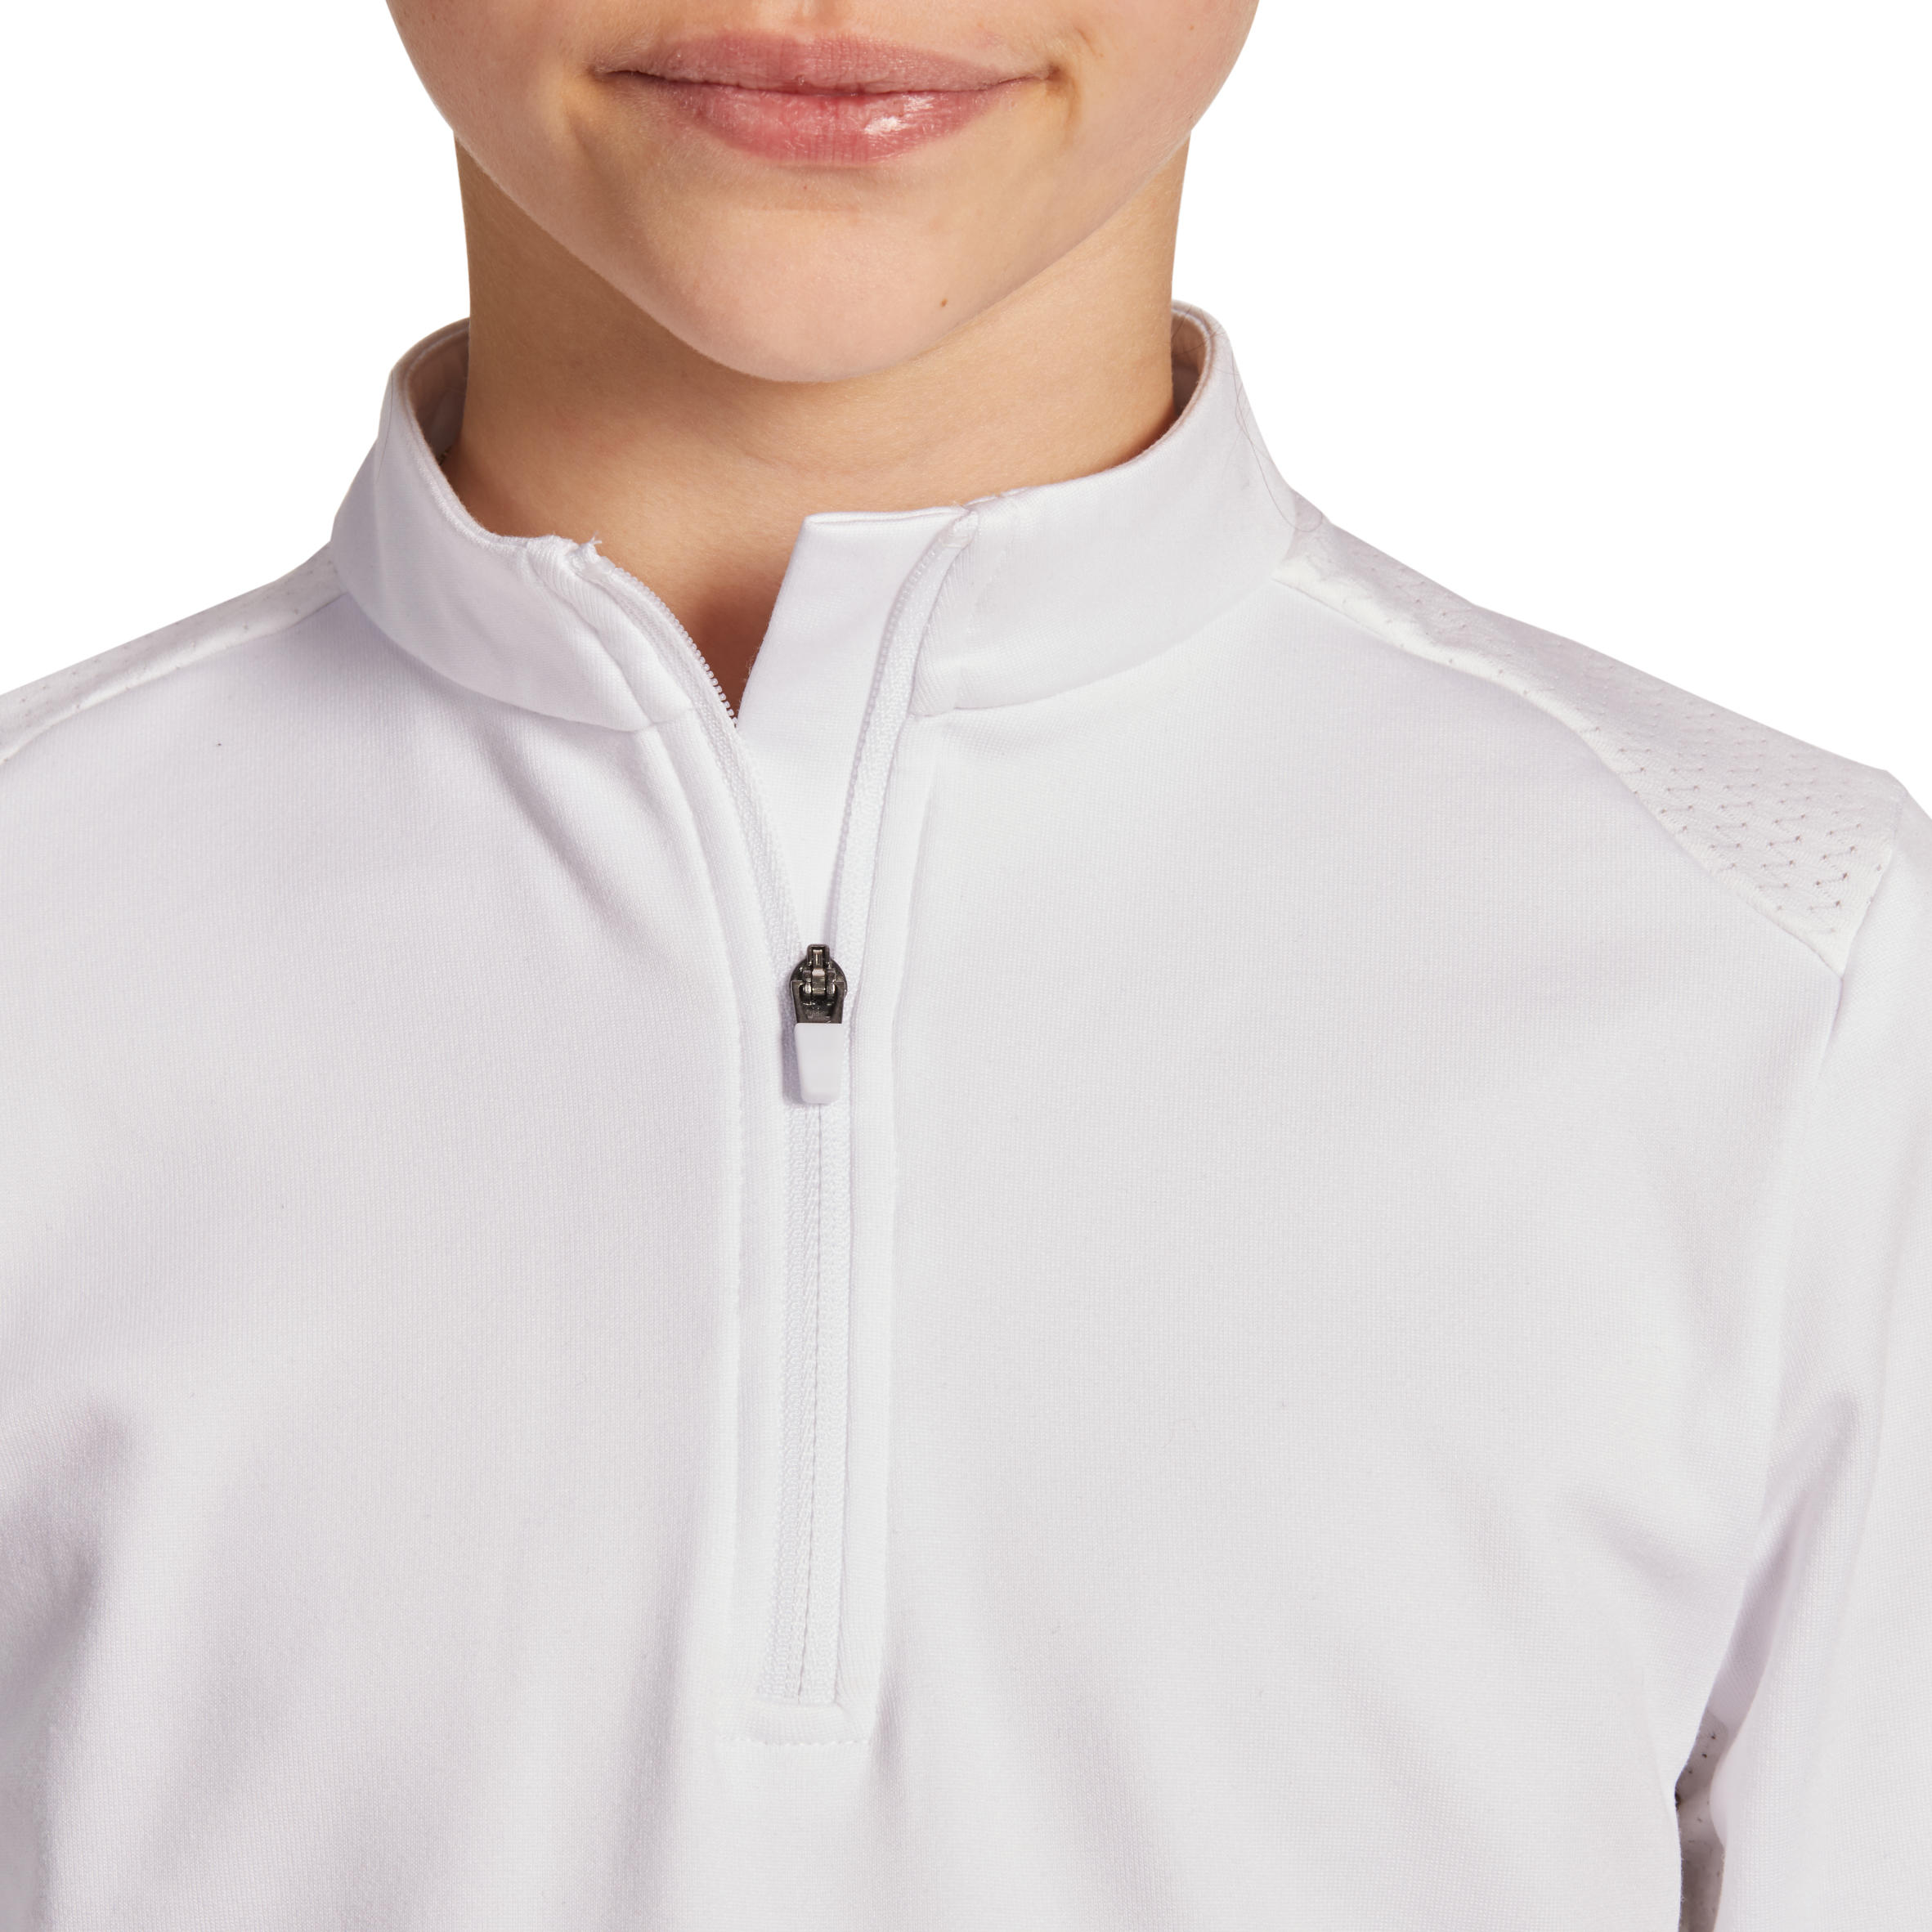 Kids' Horse Riding Long-Sleeved Warm Competition Polo 500 - White 8/9